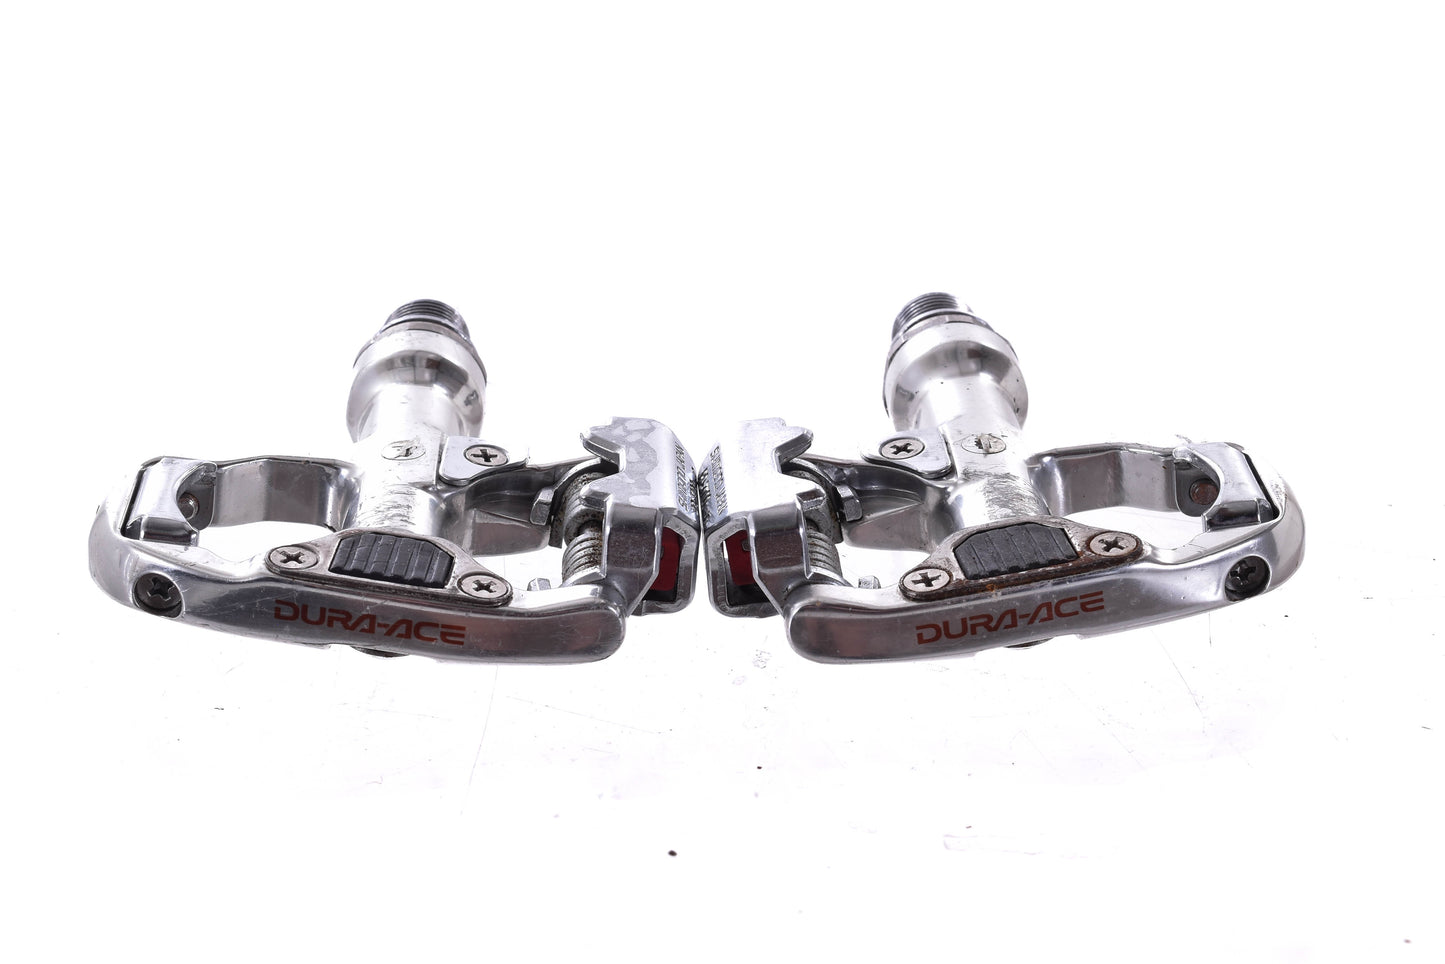 USED Vintage Shimano Dura-Ace PD-7700 Clipless Pedal Set SPD-R Polished Silver